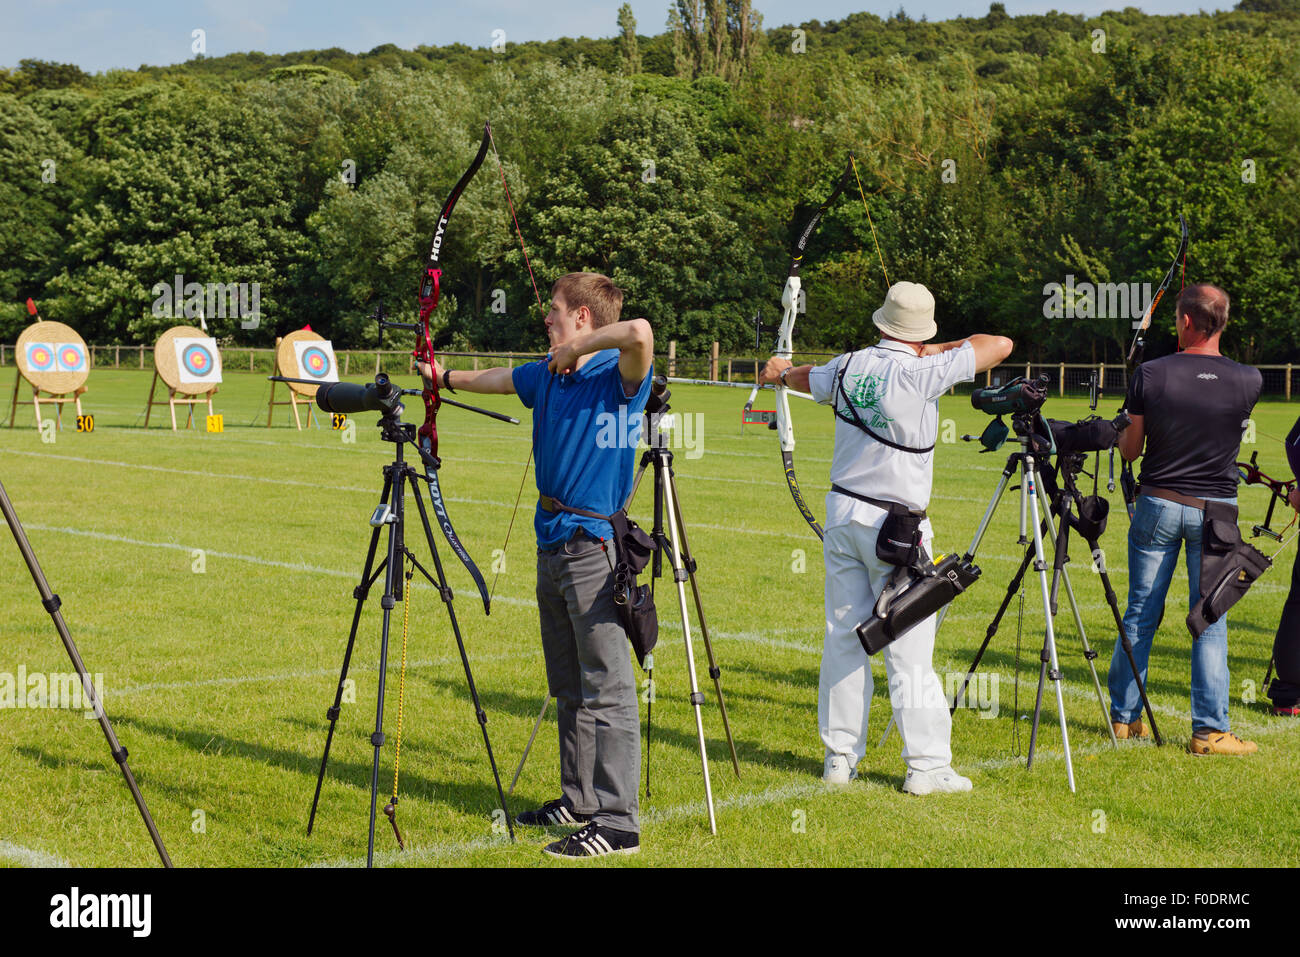 Row of male archers in line shooting recurve style bows in competition, West Yorkshire, England Stock Photo